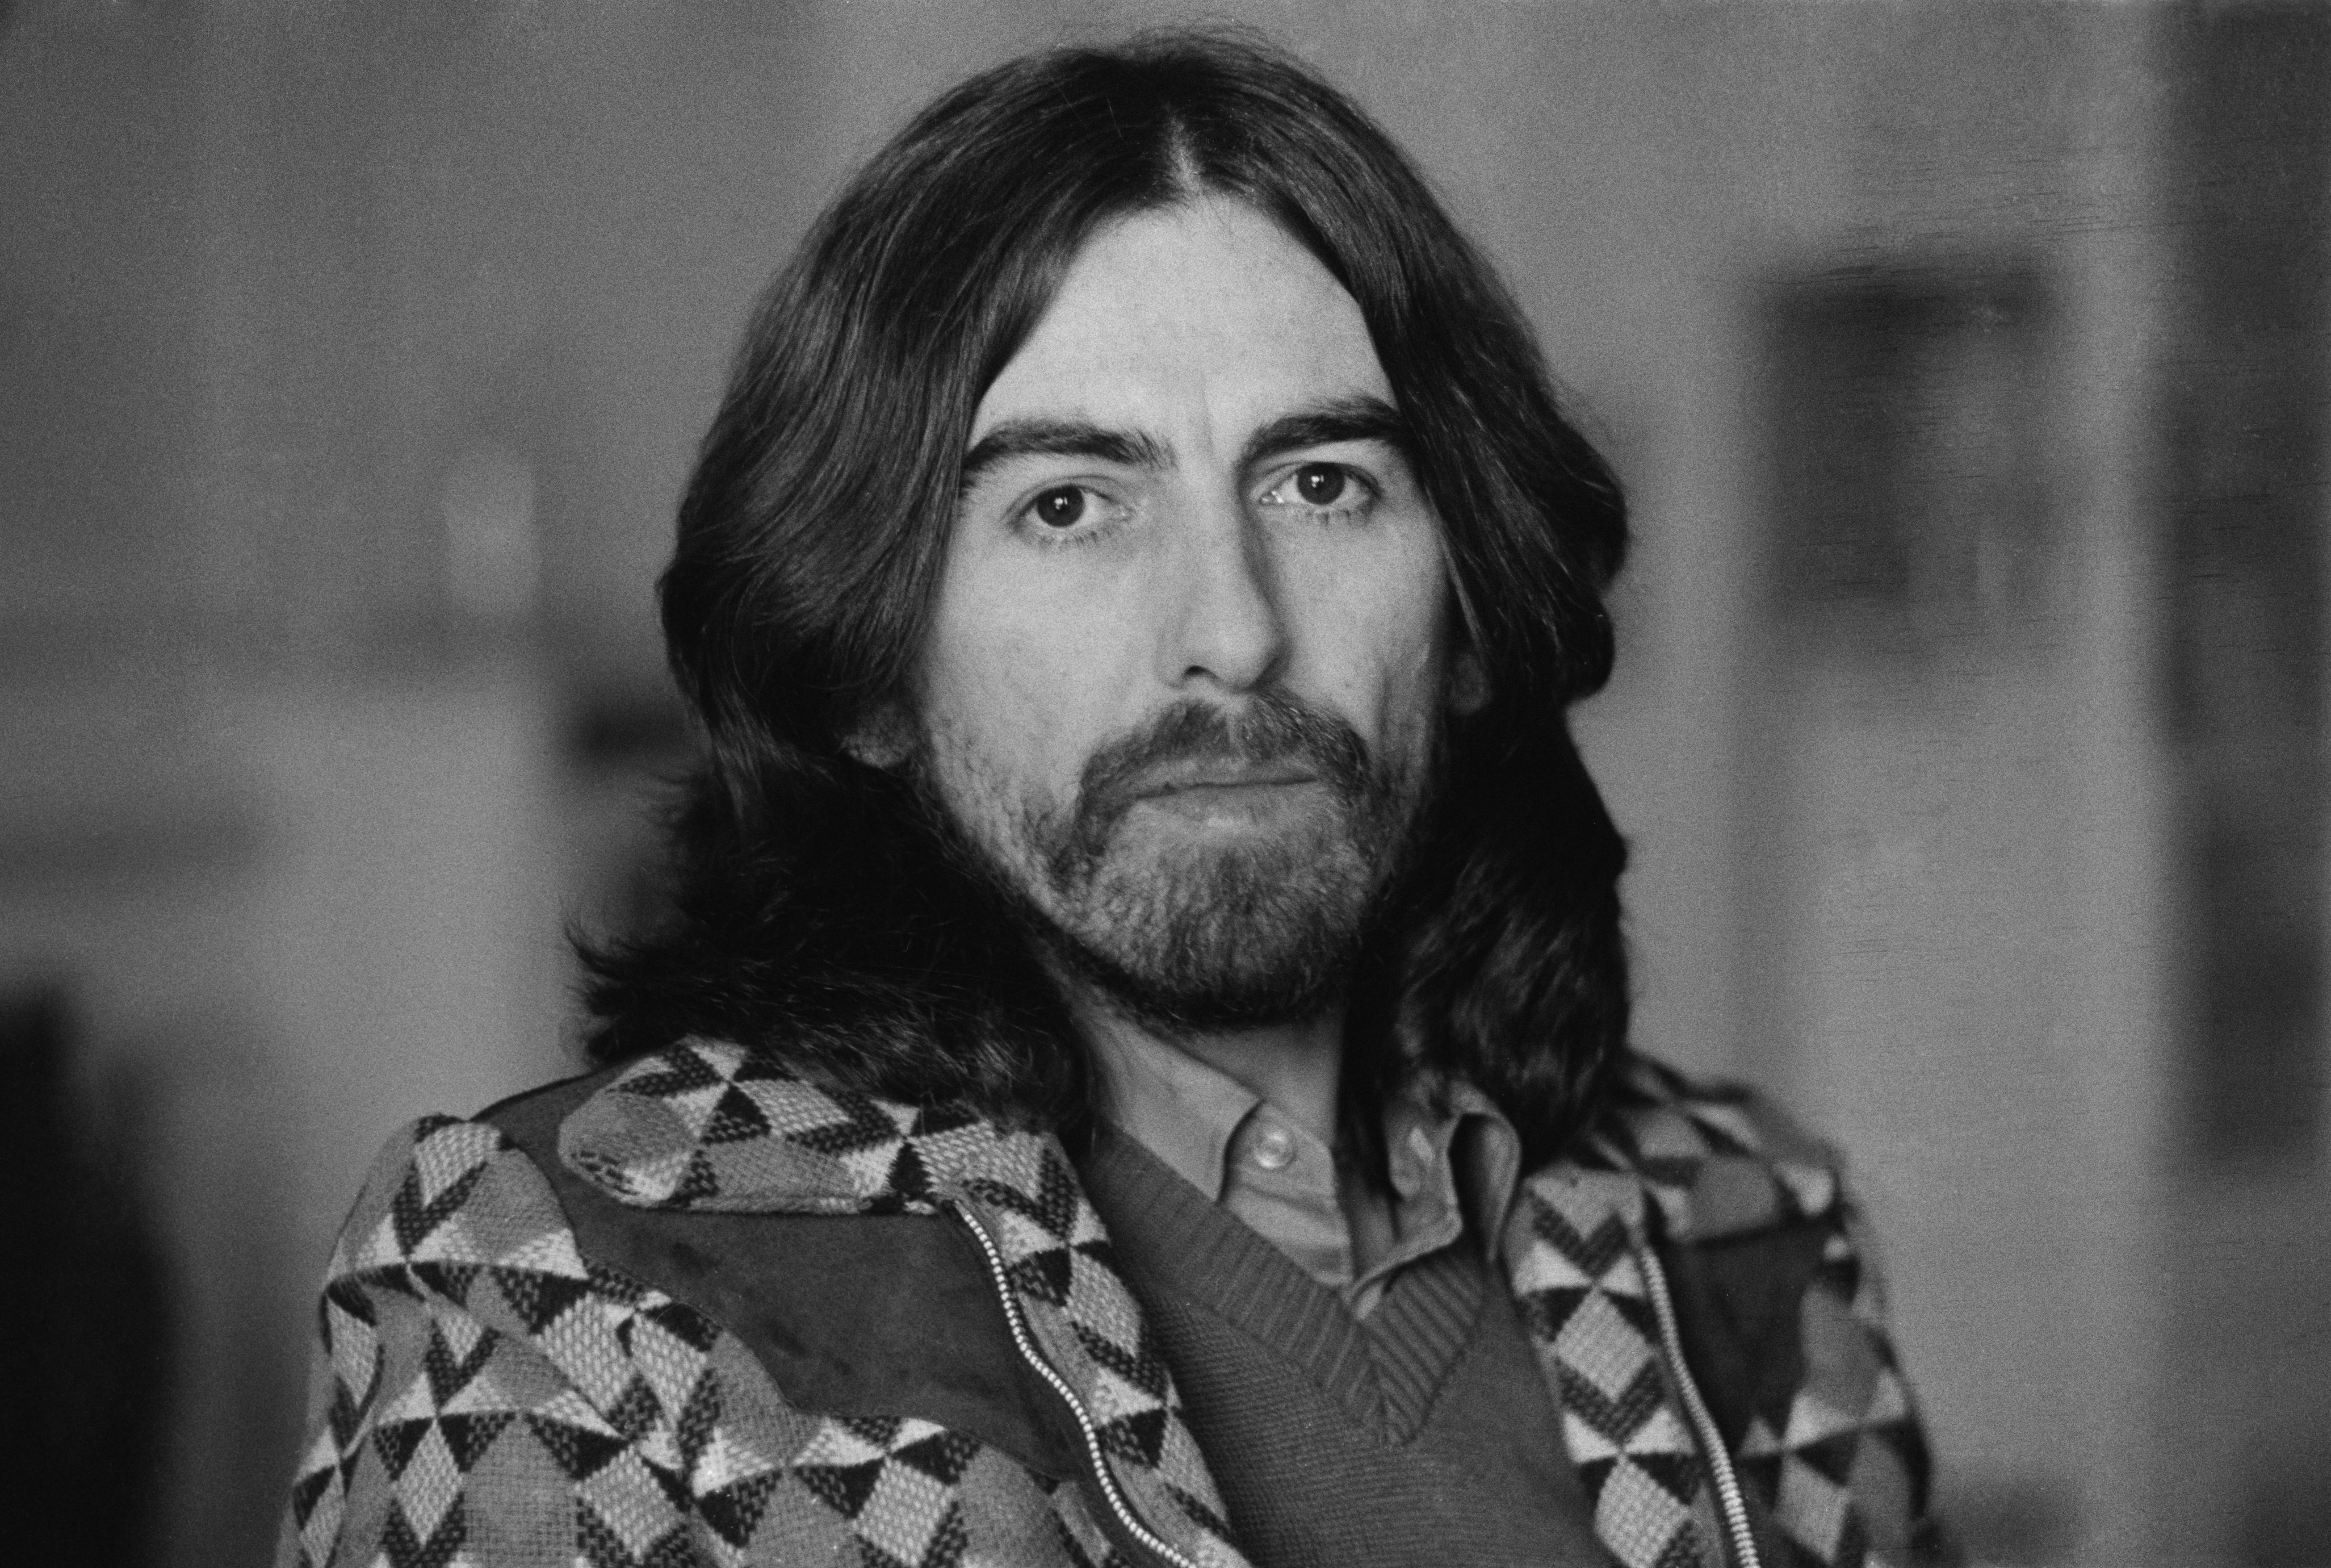 English singer-songwriter, guitarist and former Beatle, George Harrison